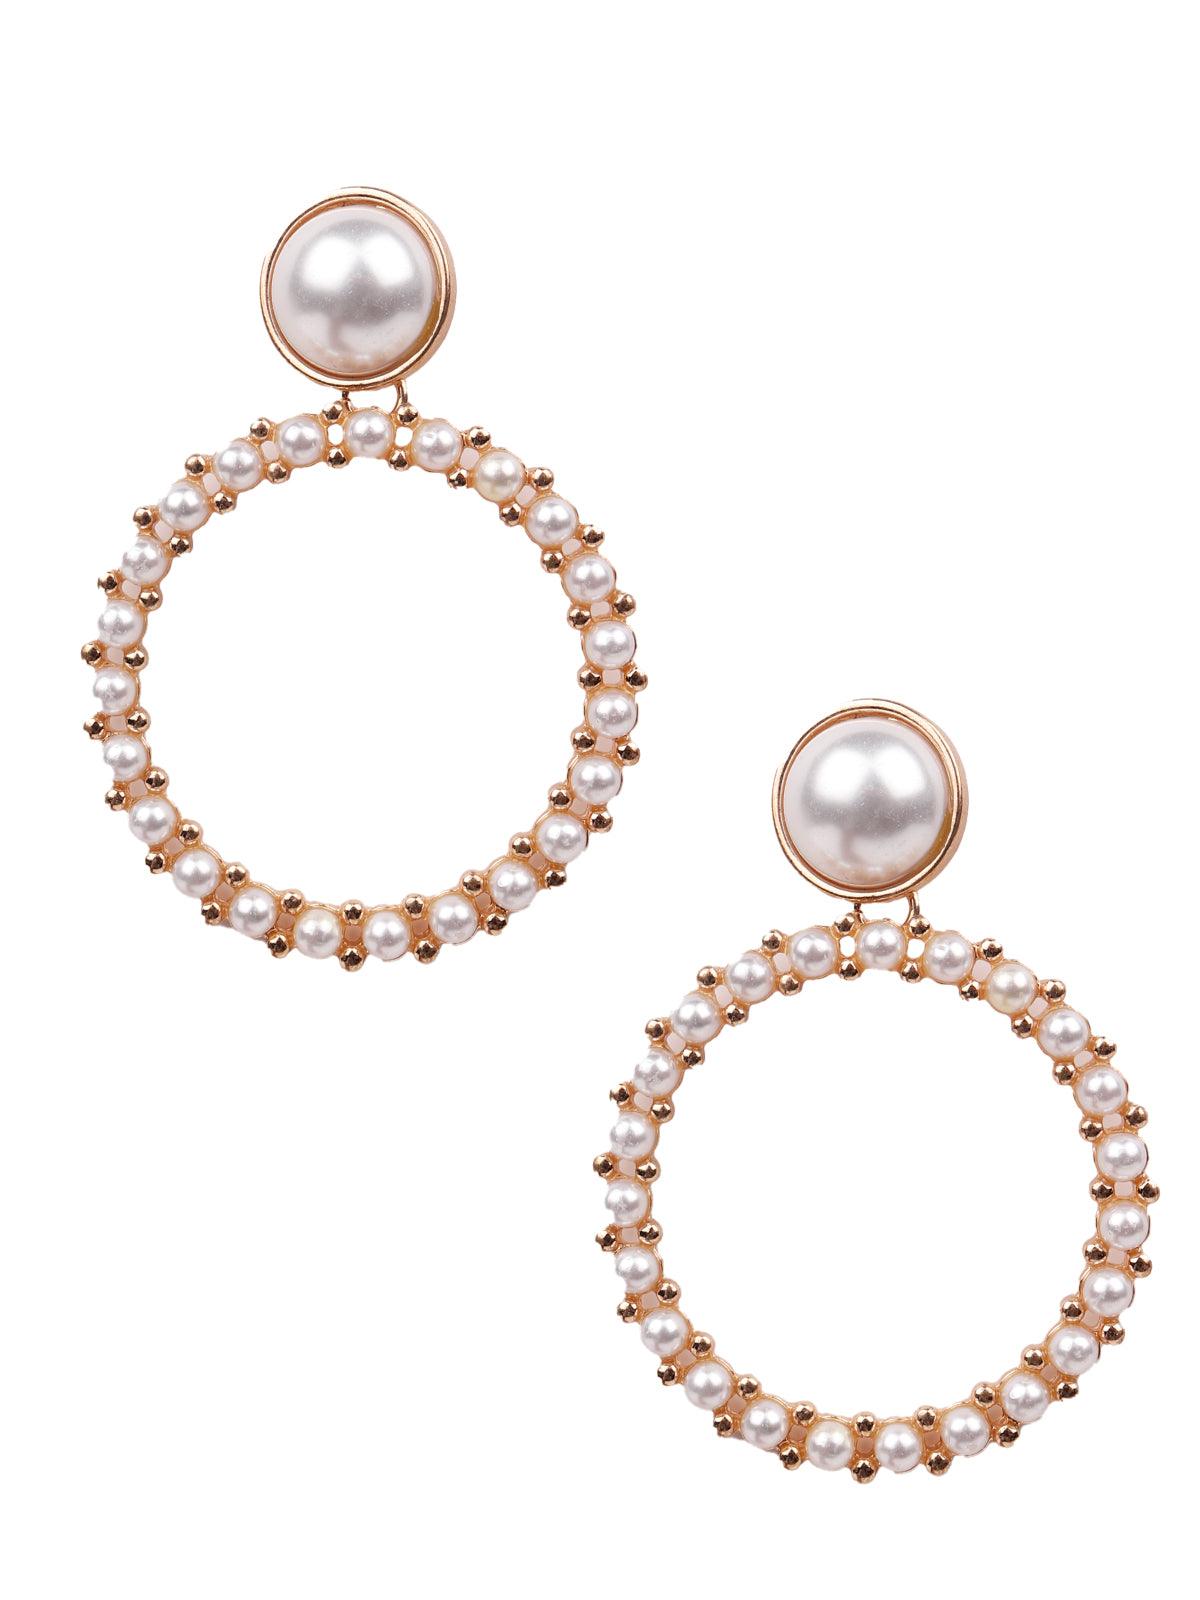 Rounded hoop earrings embellished with artificial pearls - Odette